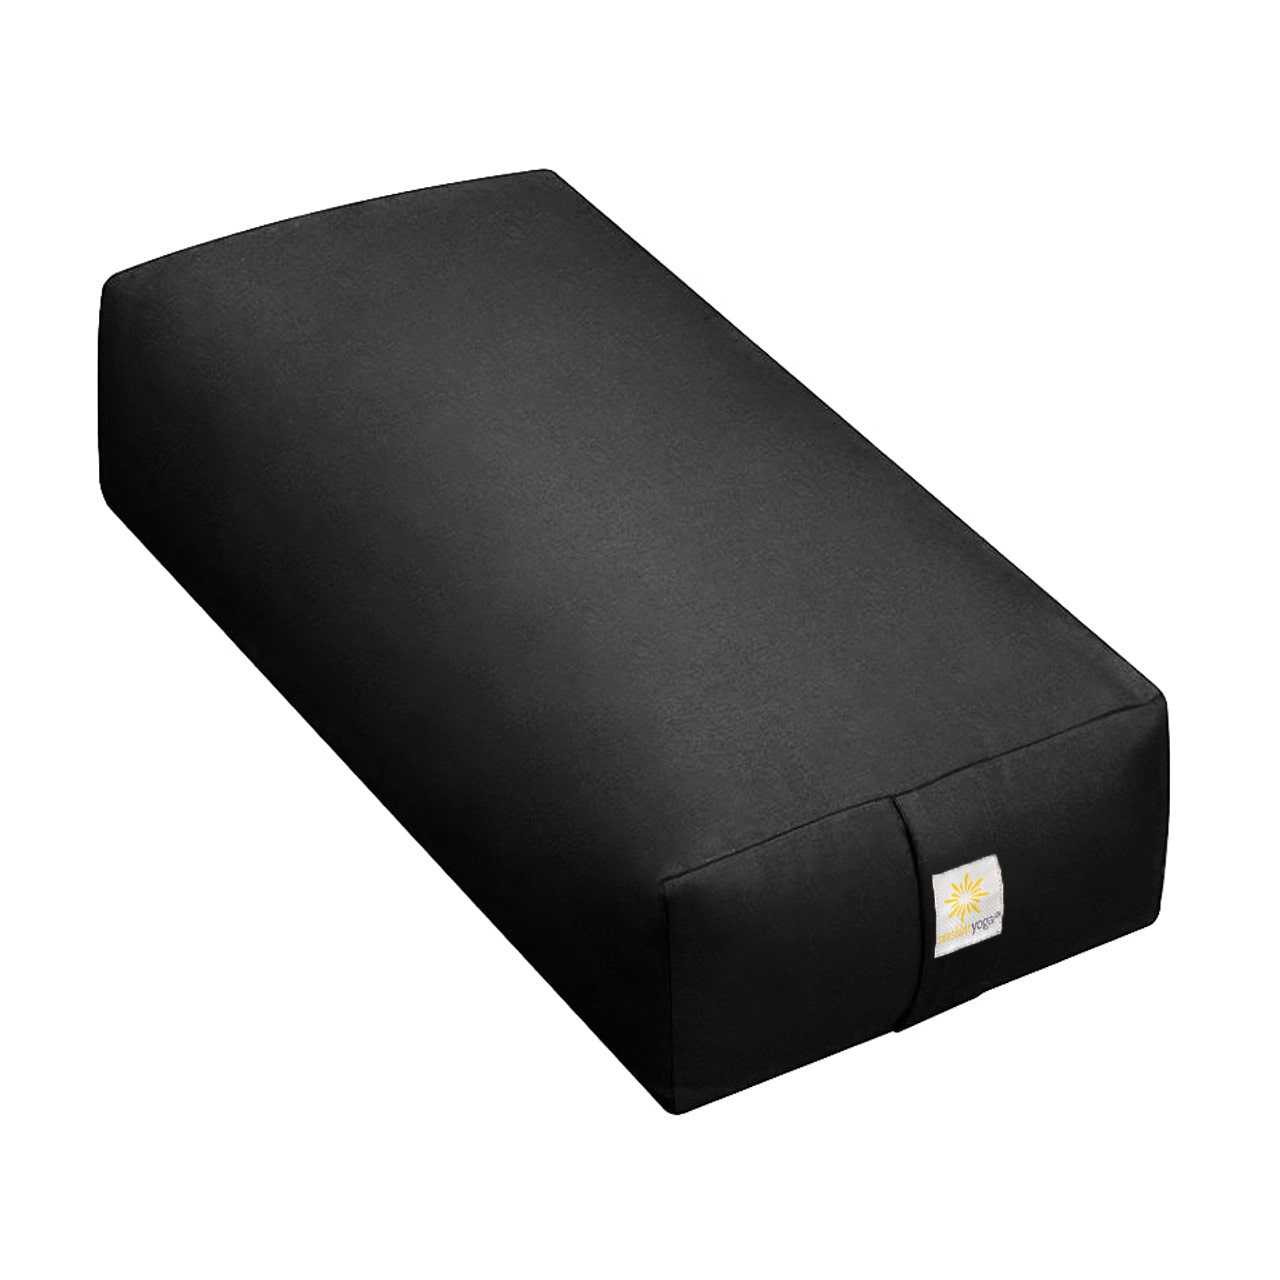 Deluxe Firm Large Rectangular Yoga Bolster (24L x 6H x 12W)